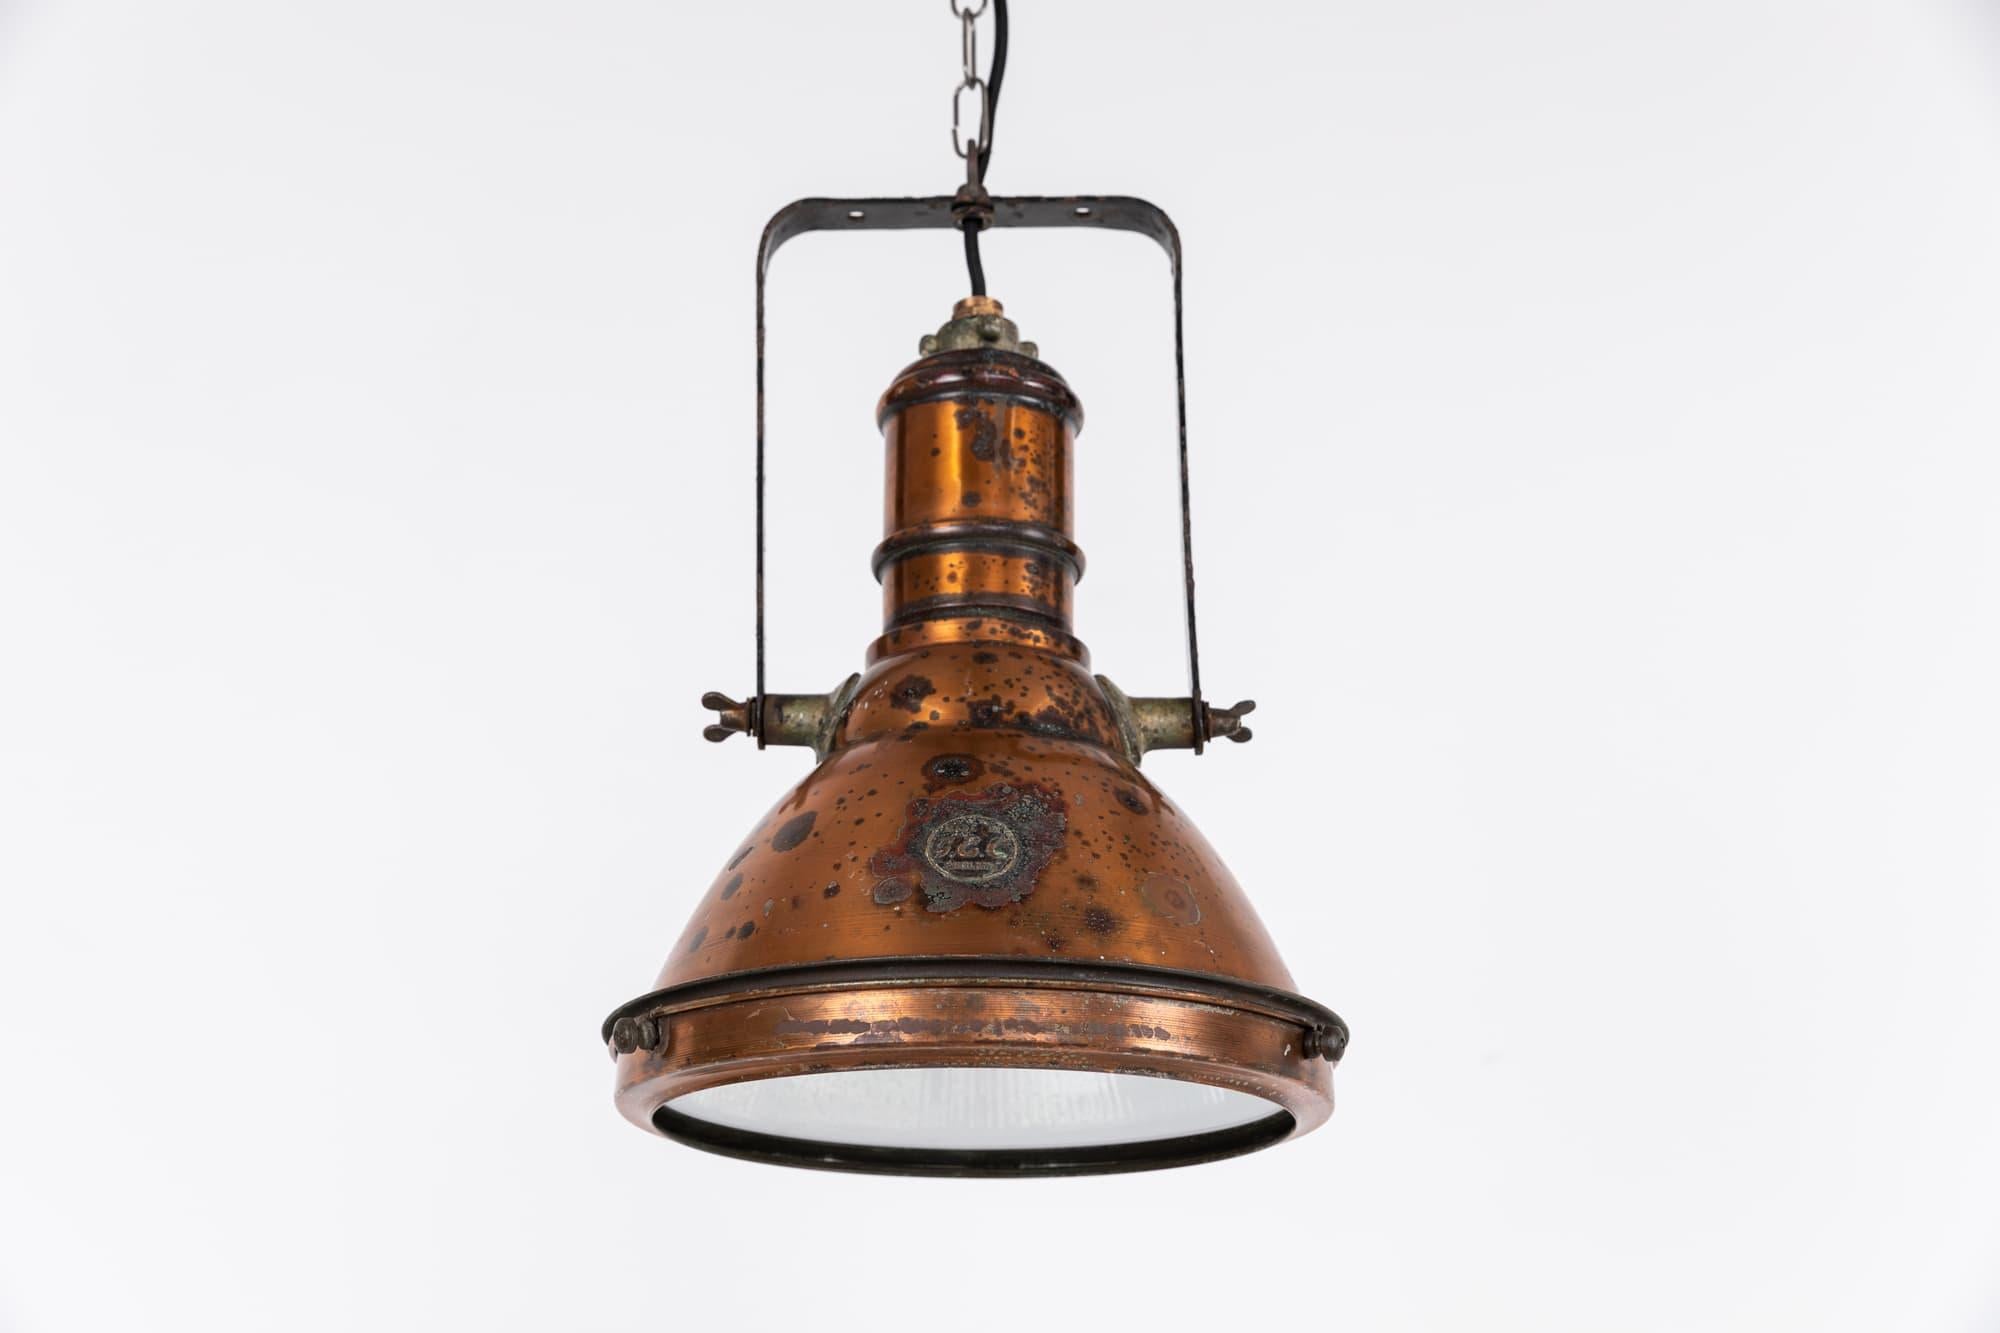 Stunning copper pendant lamp made in England by renowned light manufactures GEC - General Electric Company. c.1930

Spun copper shade in original condition with unusual and attactive and patina. Debossed brass makers badge still in place along with